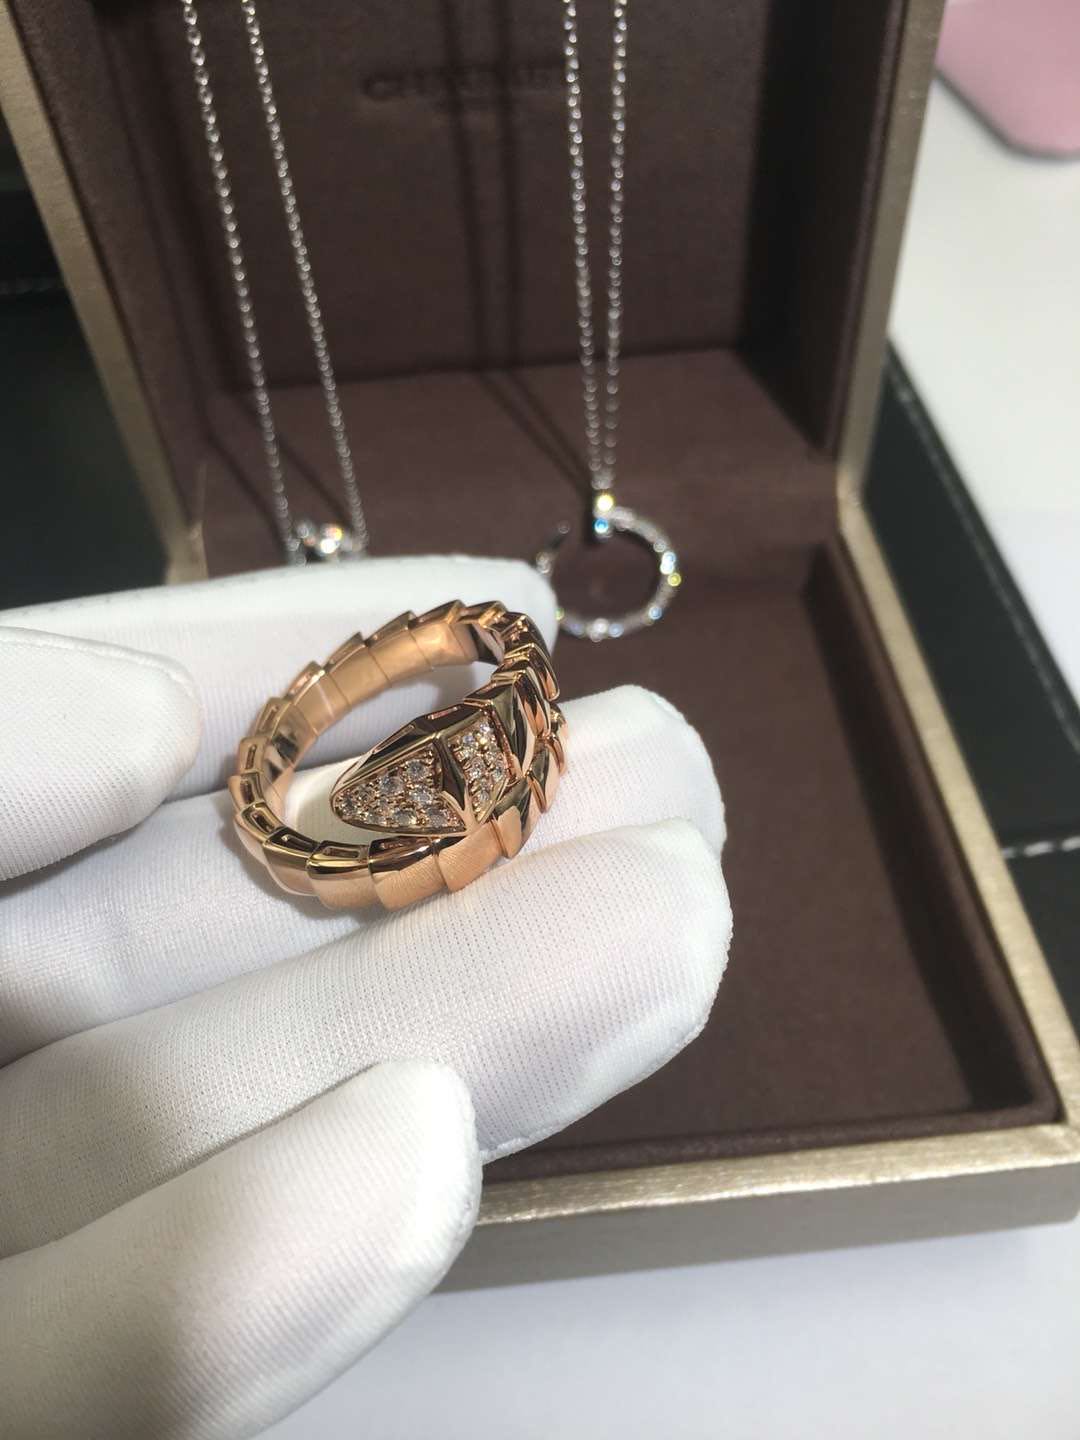 Bvlgari Serpenti one-coil ring in 18kt rose gold, set with pavé diamonds on the head